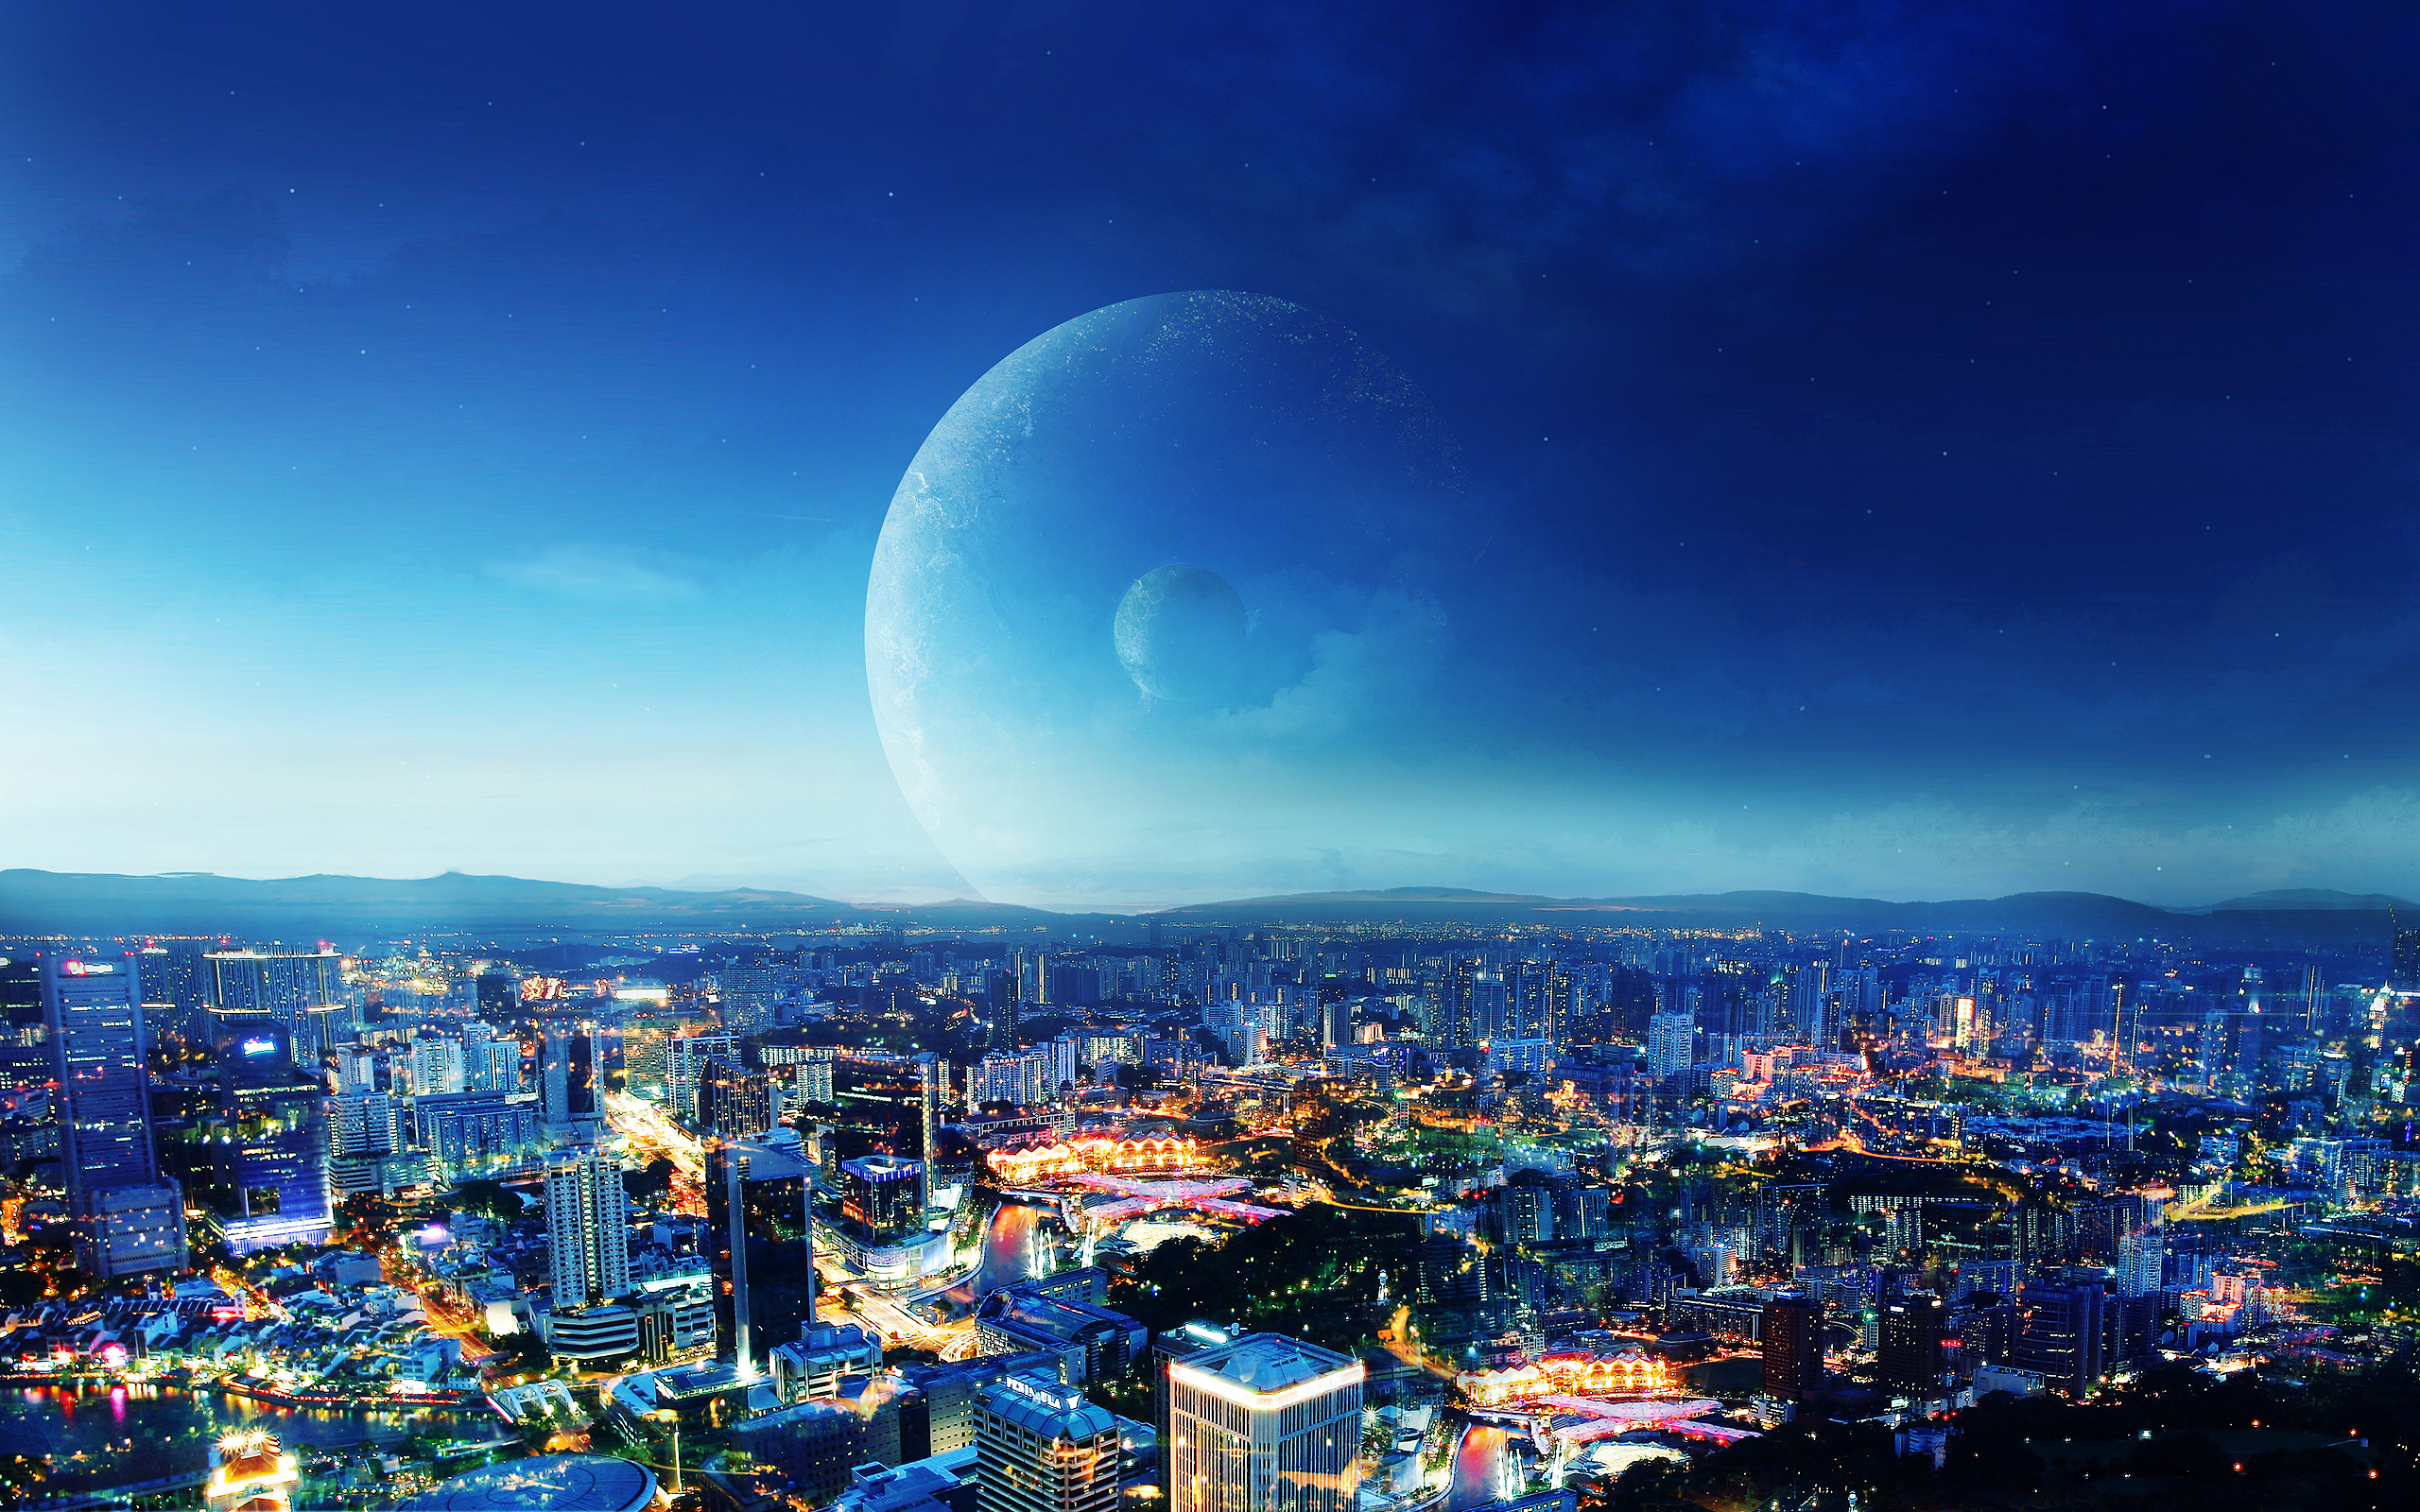 City With Stars At Night Background, Pictures Of Cities At Night Background  Image And Wallpaper for Free Download